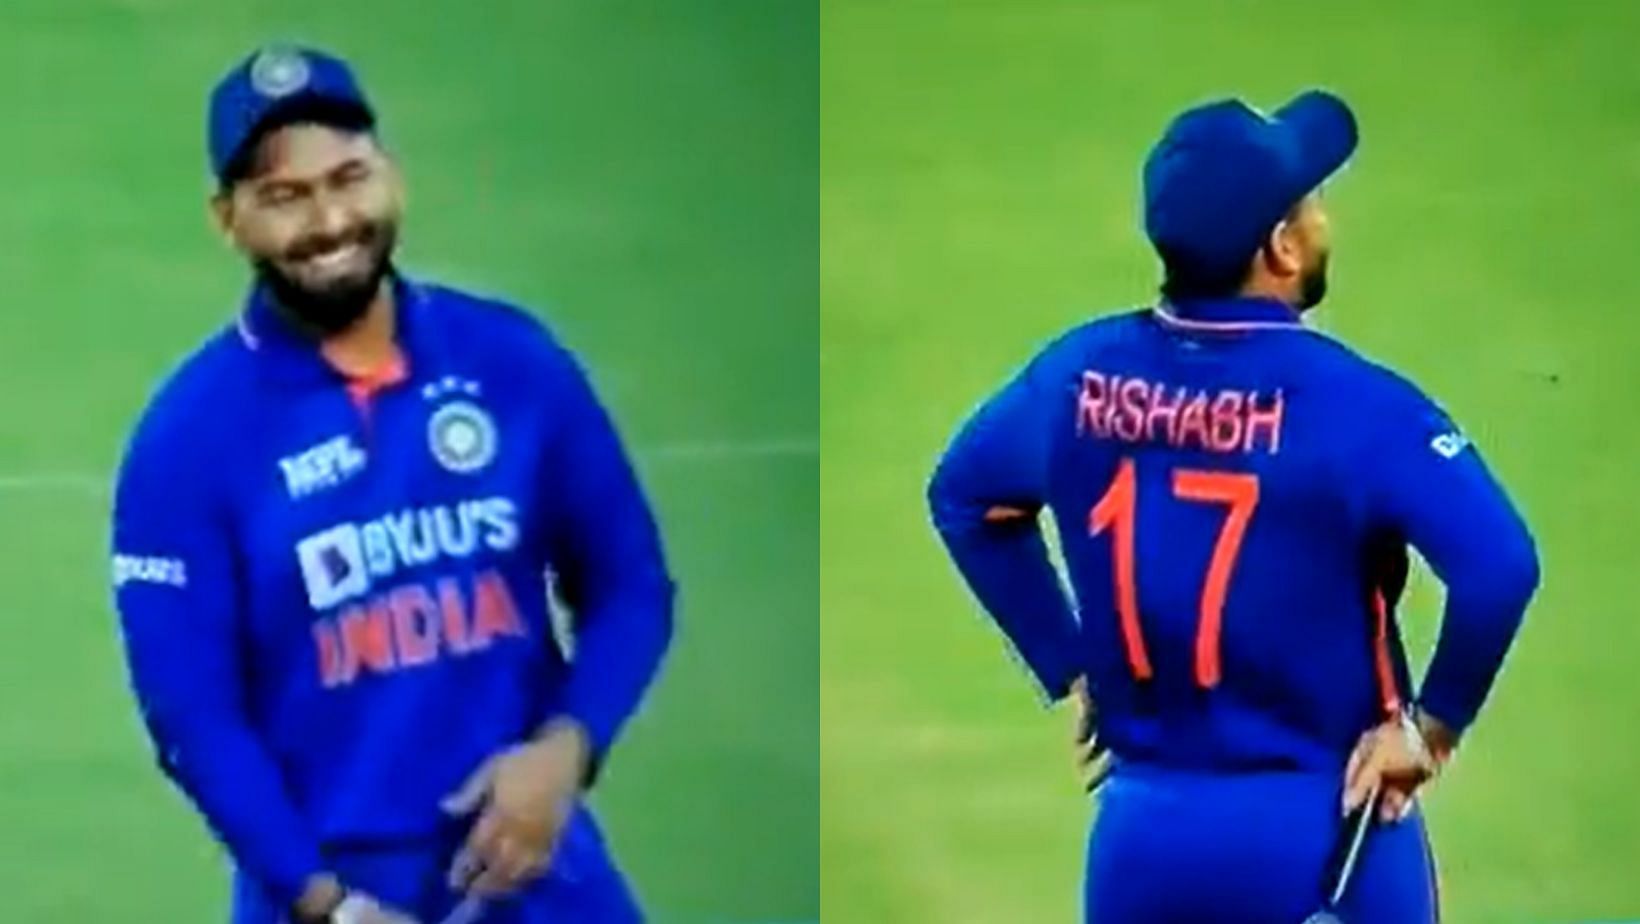 Rishabh Pant&#039;s reaction after losing the toss on Sunday.